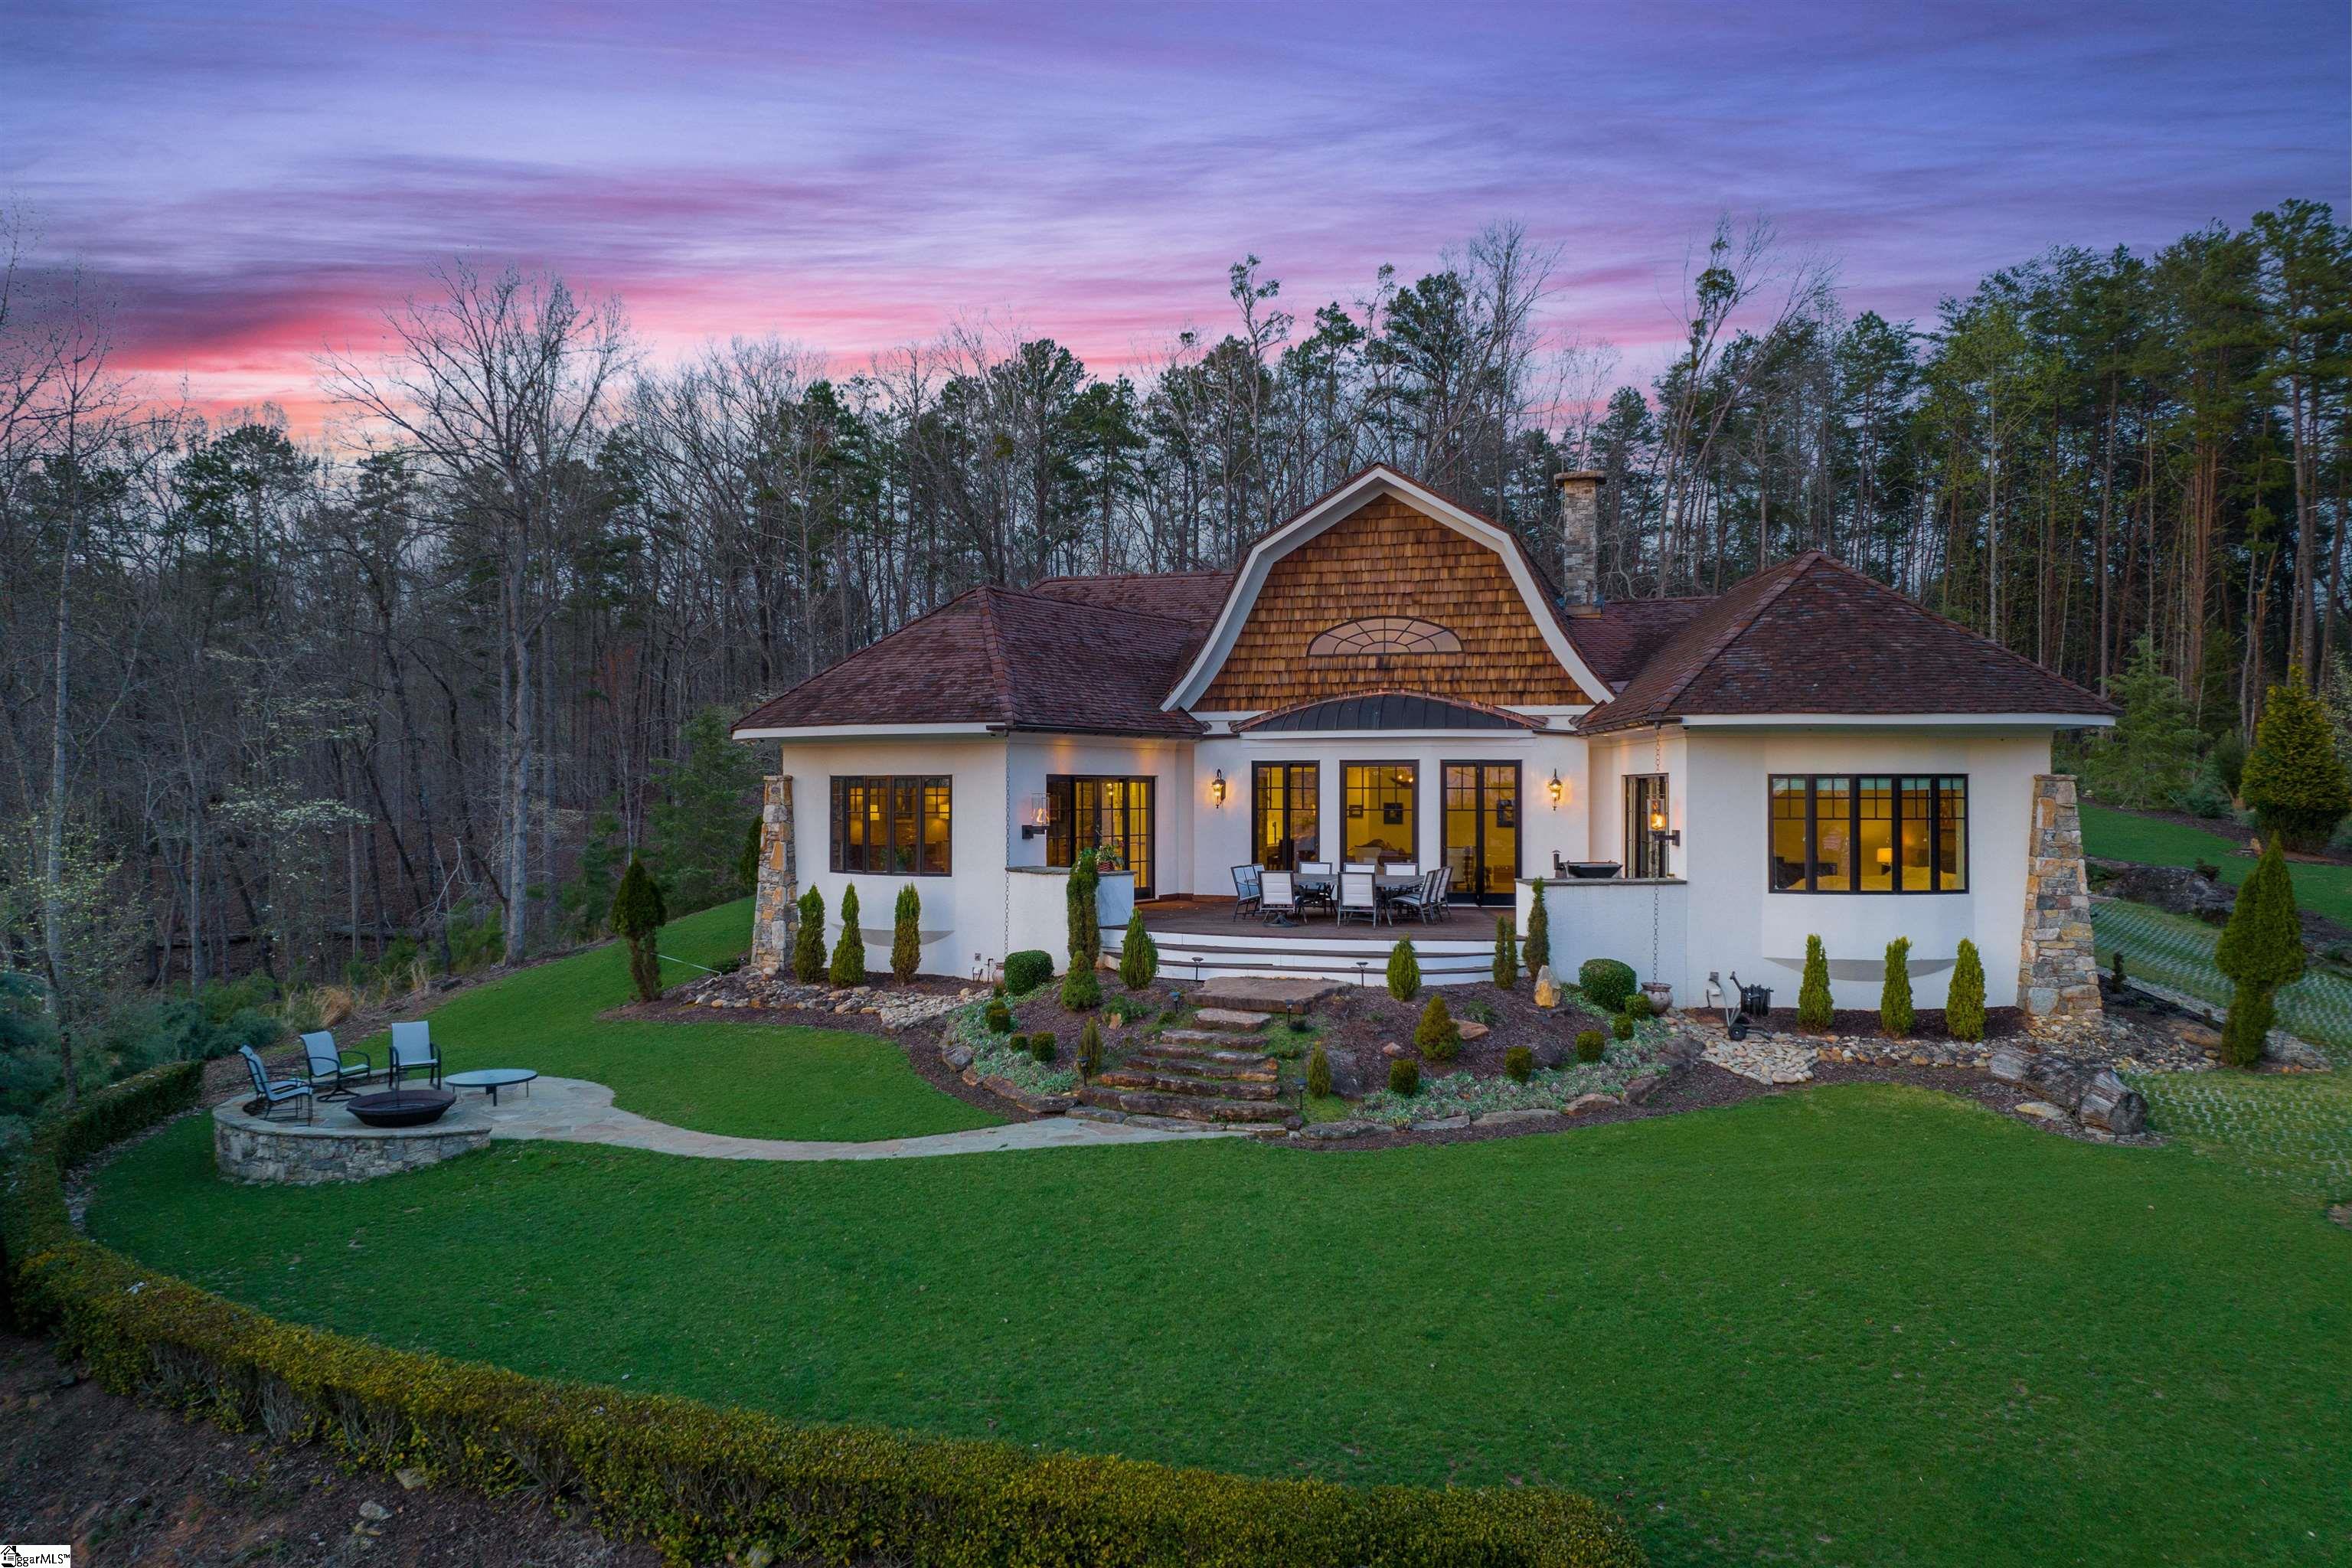 A 300 foot-long driveway leads you past a professionally designed and landscaped lawn to this astonishing house at 175 South Falls Road in the Reserve at Lake Keowee. You will feel like you are on the streets of Europe – all while in the wilds of South Carolina – as you pass a variety of 0rnamental trees, shrubs and plants, beautiful gardenias and tea tree olives, extremely aromatic, dwarf boxwoods, butterflies shrubs, lilies, peonies shrubs, Deodar cedars, Golden spruces and an array of Bonsai trees in the front of the house. The house is situated on two acres filled with red oaks, white oaks, hickories, tulip poplars, black cherries, dogwood trees, mountain laurels, persimmon trees, wild black raspberries, wild blueberries, wild muscadine grape vines. Just when you think you’ve seen everything, you will find a courtyard covered with herringbone brick pavers and circular Doggett mountain stone feature that can be used for a bird’s bath or water fountain at the top of the driveway. Are you ready to enter the house? Walk through the Borano custom made double leaf Mahogany doors to a house drawn by James Seward, who designed houses in the Cliffs as well. It has been built with insulated concrete forms, filled with concrete, and reinforced by steel cables and rebar, which makes a home incredibly strong, almost 12-inch thick walls. Because of this, the house is extremely quiet, very well insulated, and highly energy efficient. The foyer featured a half round wall, covered with a textured finish with the coat room and a powder room to the left and right. The great room features a 20-foot tall ceiling wit, custom Douglas Fir timber beams with curved brackets, a custom Dogget mountain fireplace, herringbone firebox, constructed with Isokern fireplace system made with volcanic material from Iceland with Dogget Mountain Stone columns in between arches, supporting arches and timber beams The kitchen features a double groin vaulted ceiling, merchant lantern with glass dome chandelier, a custom made China Cabinet with walnut wood backing, and solid walnut and Carrara Marble counter tops, interior illumination, fully extended drawers. Two Bosch dishwaters, a subzero refrigerators, a wolf single burner gas cooktop and a Gaggenau Induction cooktop highlight the appliances. It also has a pantry and root cellar. Three bedrooms include a luxurious main suite that includes cove ceilings, texture finished walls, Mahogany custom pocket door, a panoramic bay window, his and hers closet and a bathroom featuring a Sanijet pipeless spa bathtub. Still want more? It also has a three car garage and work area with utility sink as well as a patio great for watching sunsets and views of the lake. A once in a lifetime find!